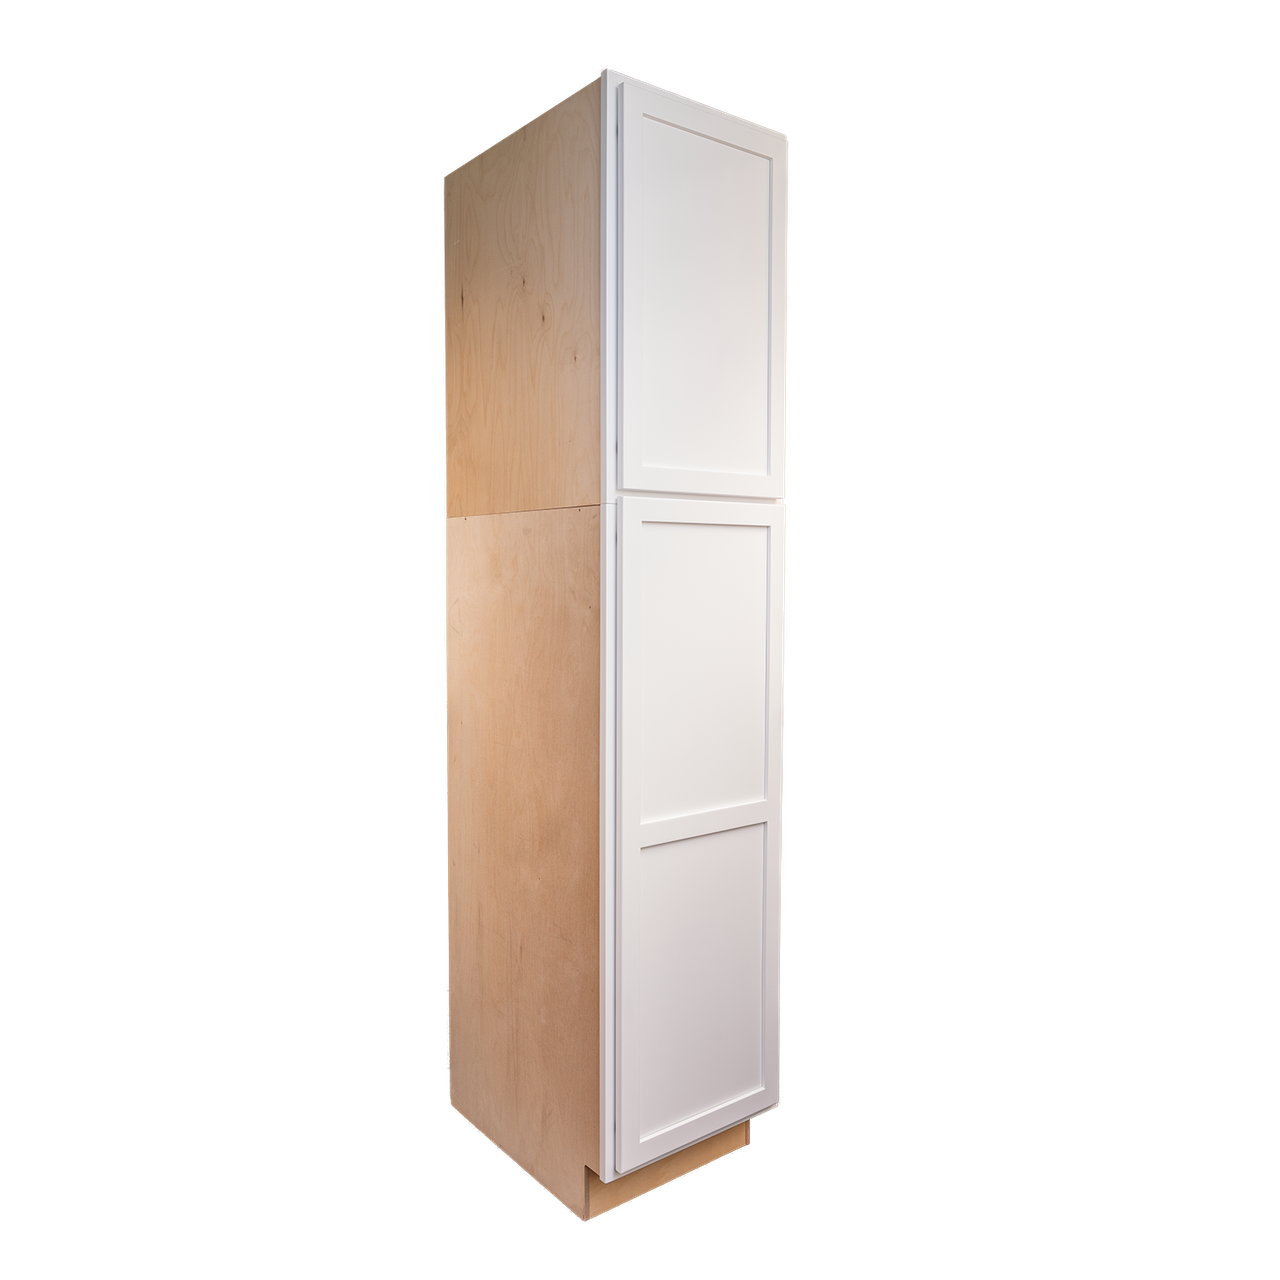 Quicklock RTA (Ready-to-Assemble) Pure White Pantry Cabinet- 18"W x (84", 90", 96"H)